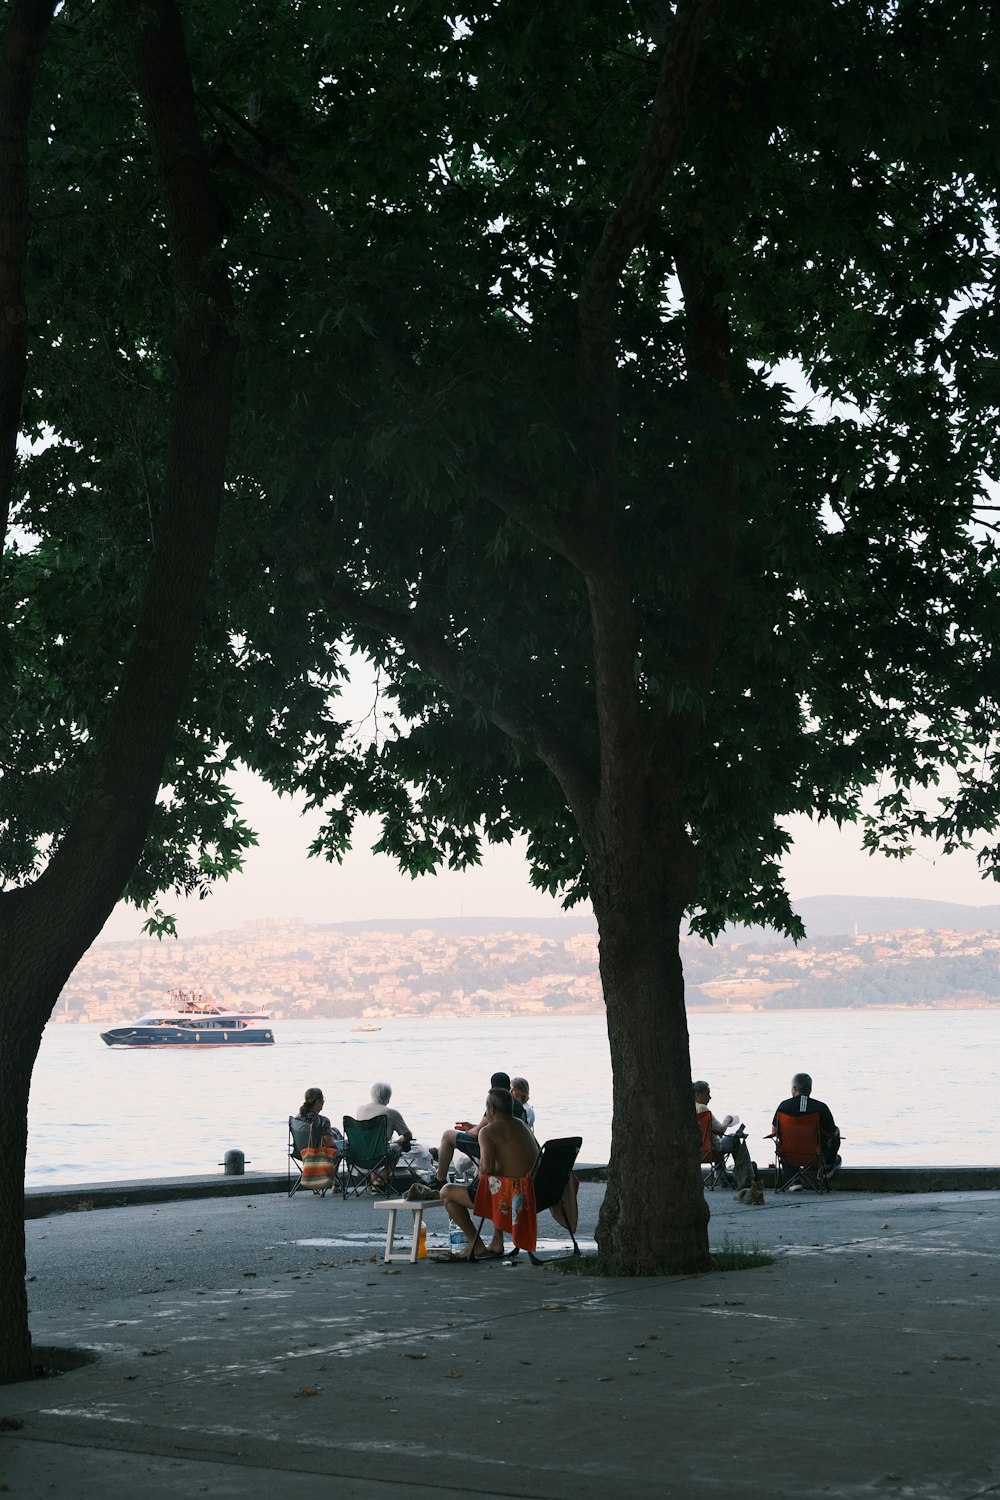 a group of people sitting under a tree next to a body of water